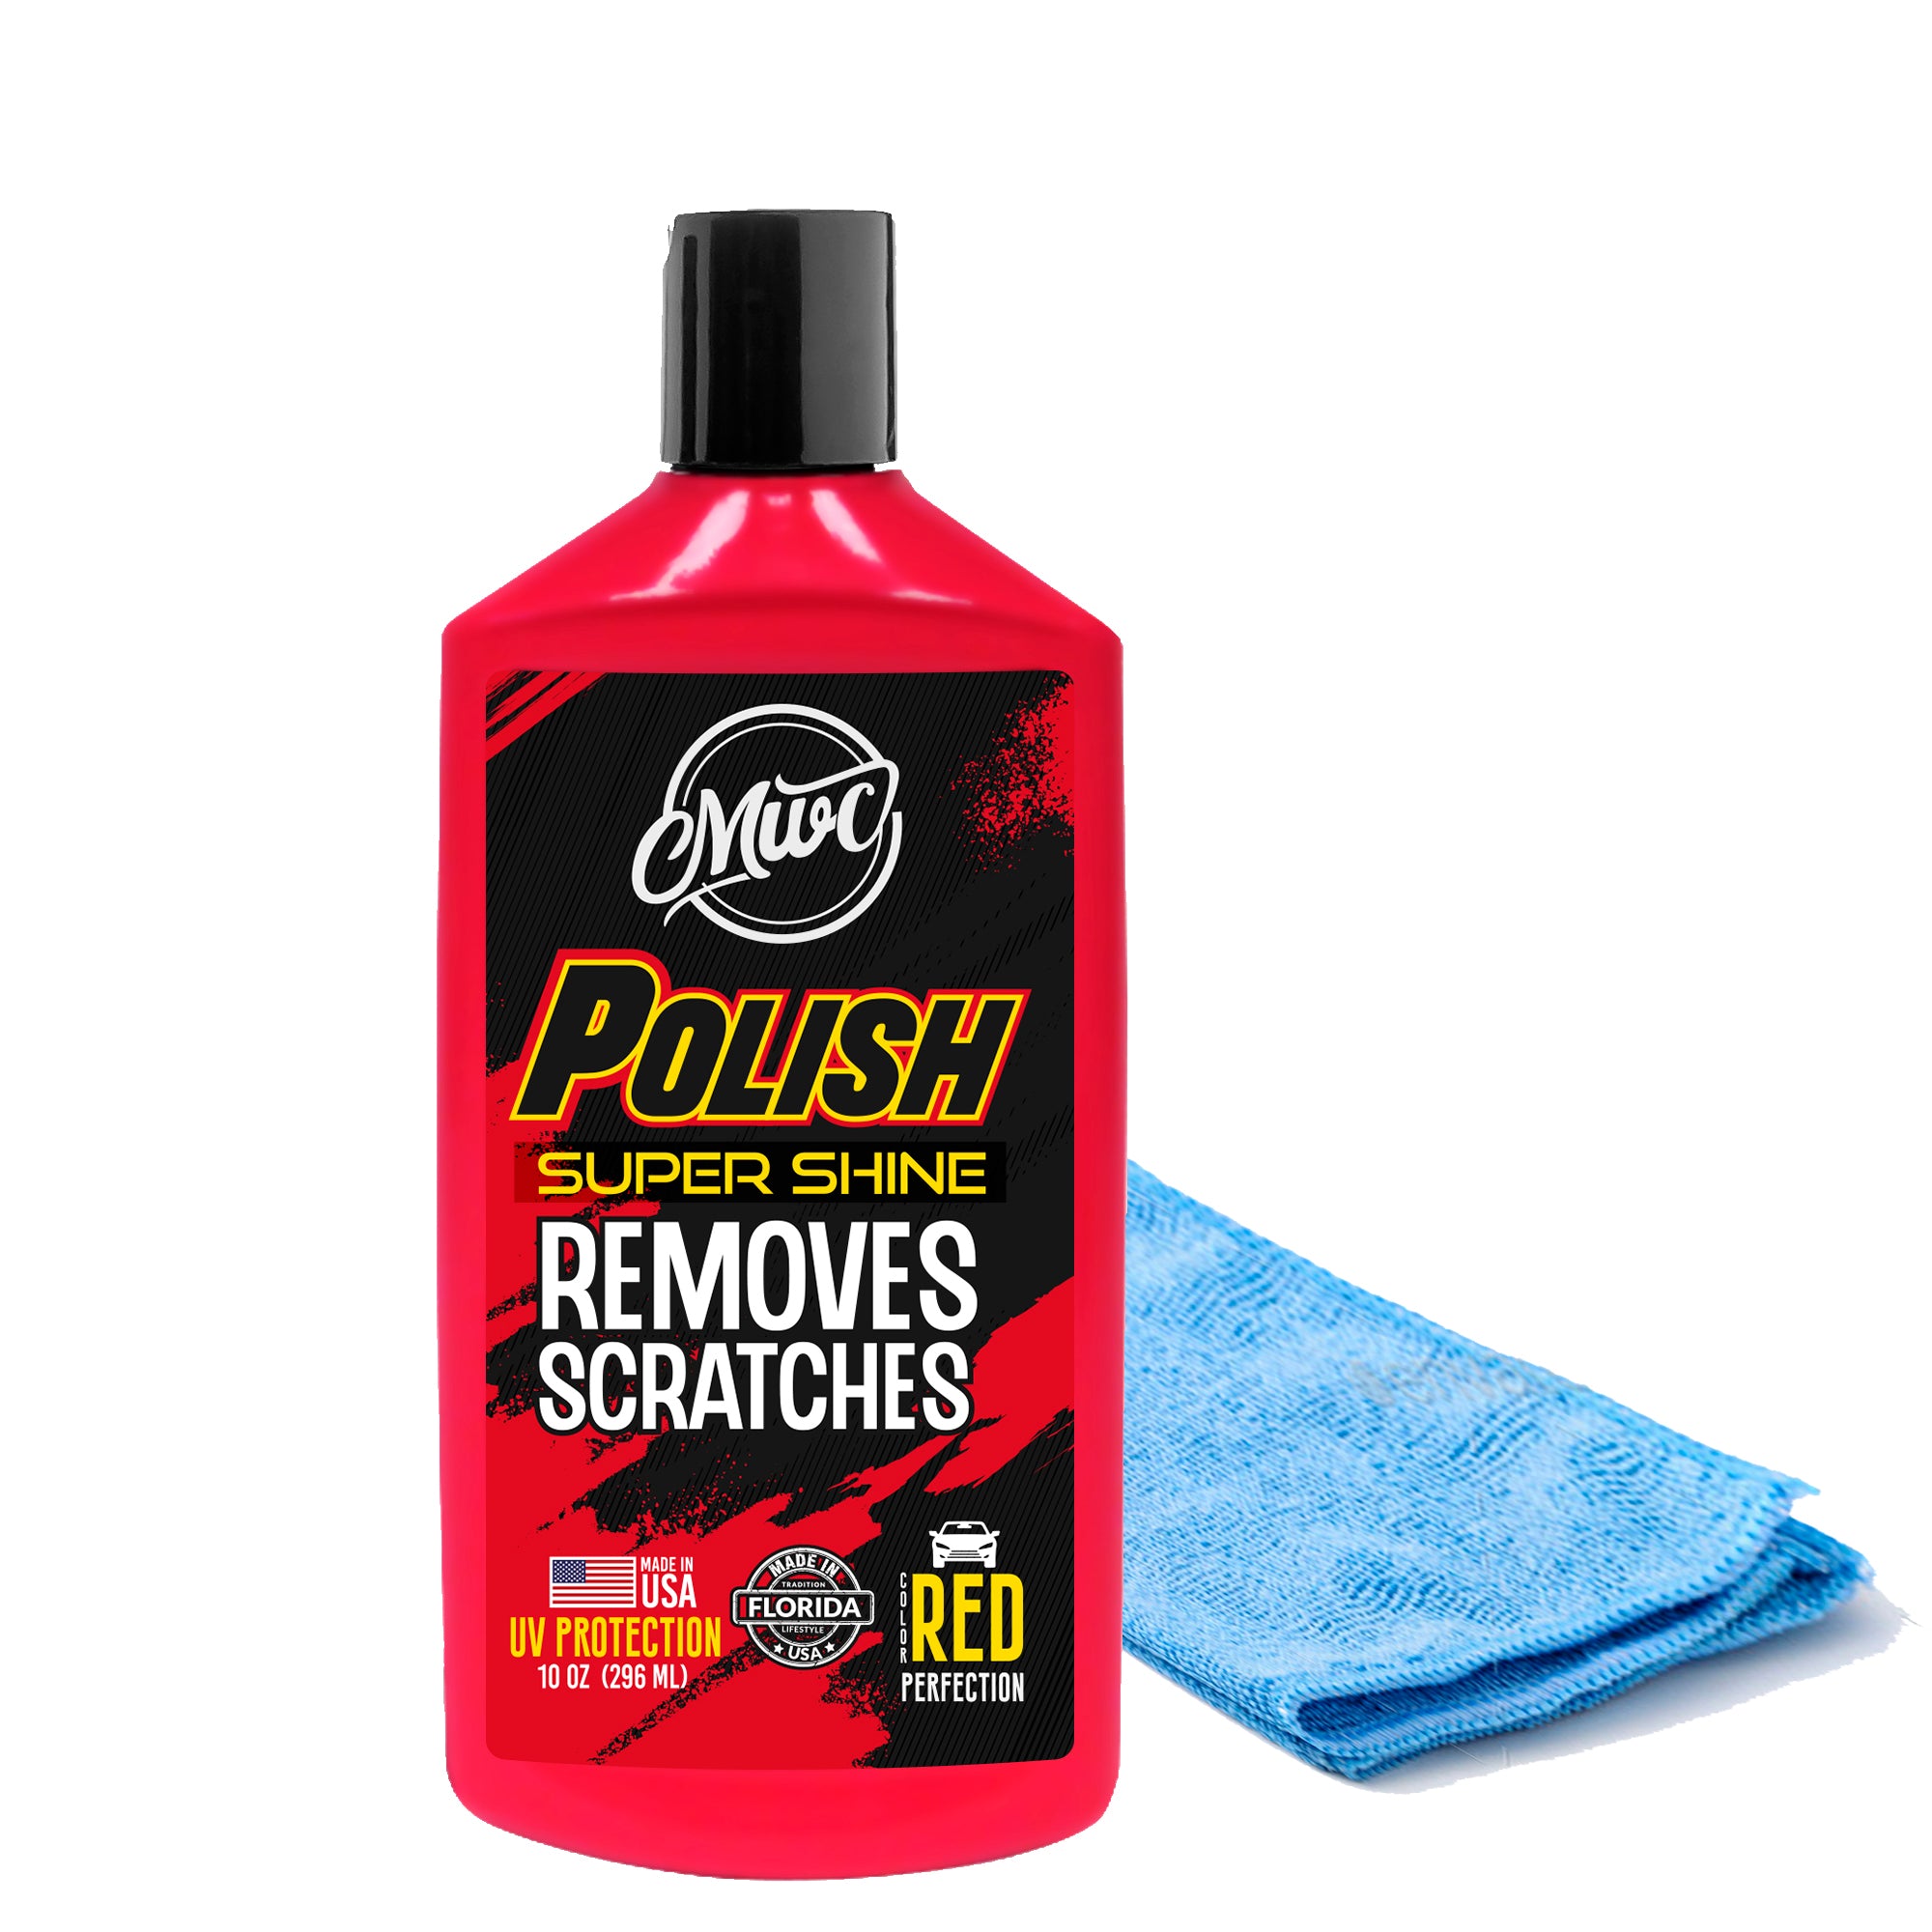 MWC Car Polish Removes Scratches Restores Colour and Super Shine Red 10 Oz with a Microfiber Cloth FREE